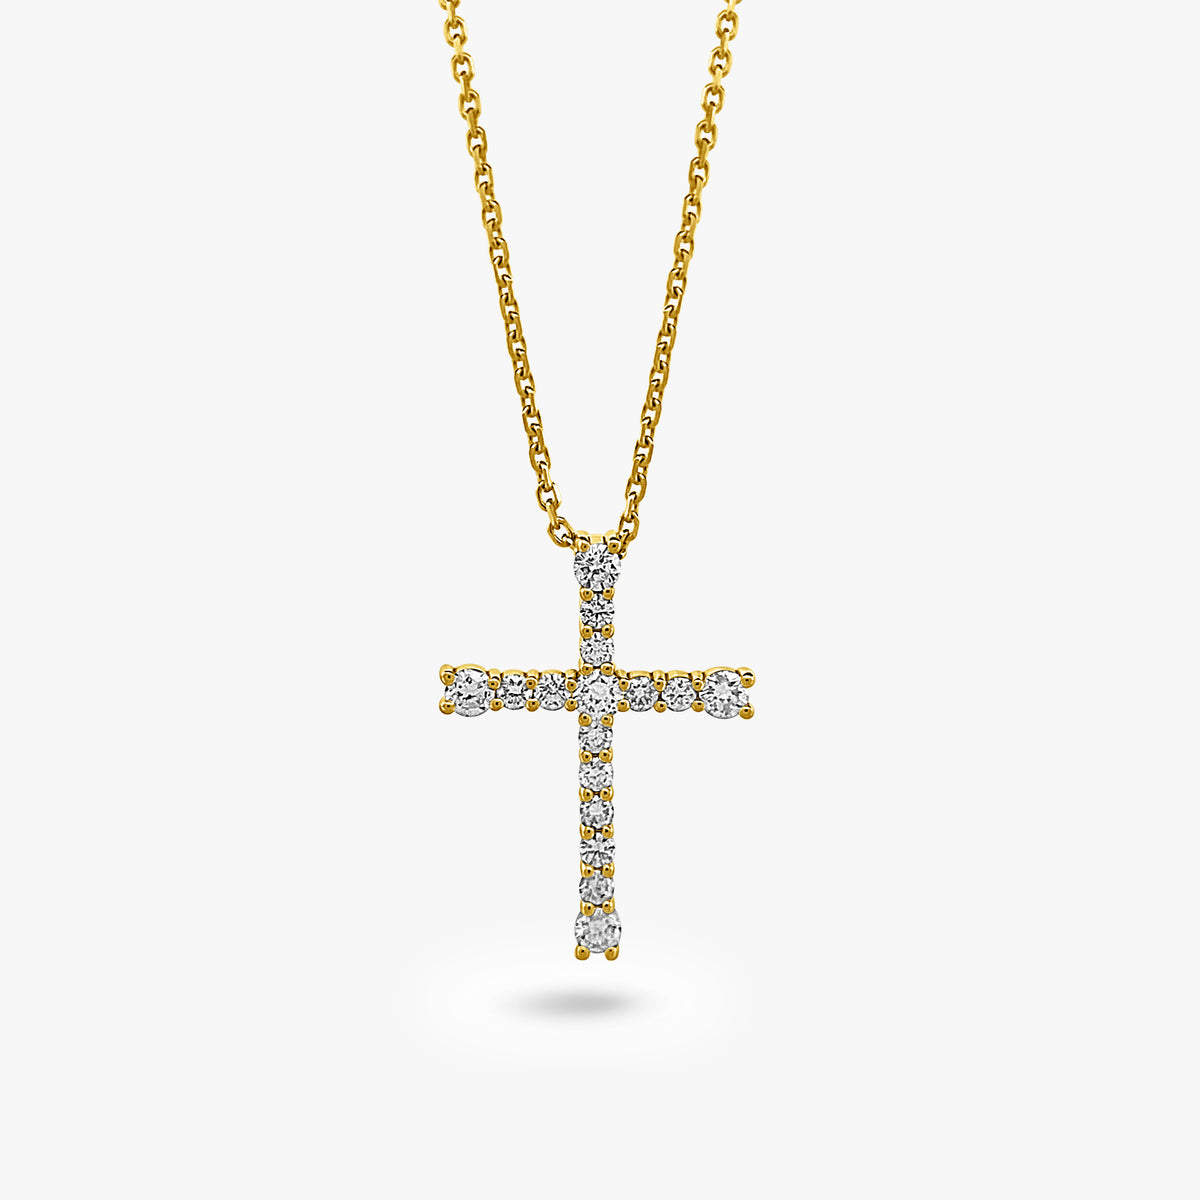 16 Stone Cross Necklace With Adjustable Chain